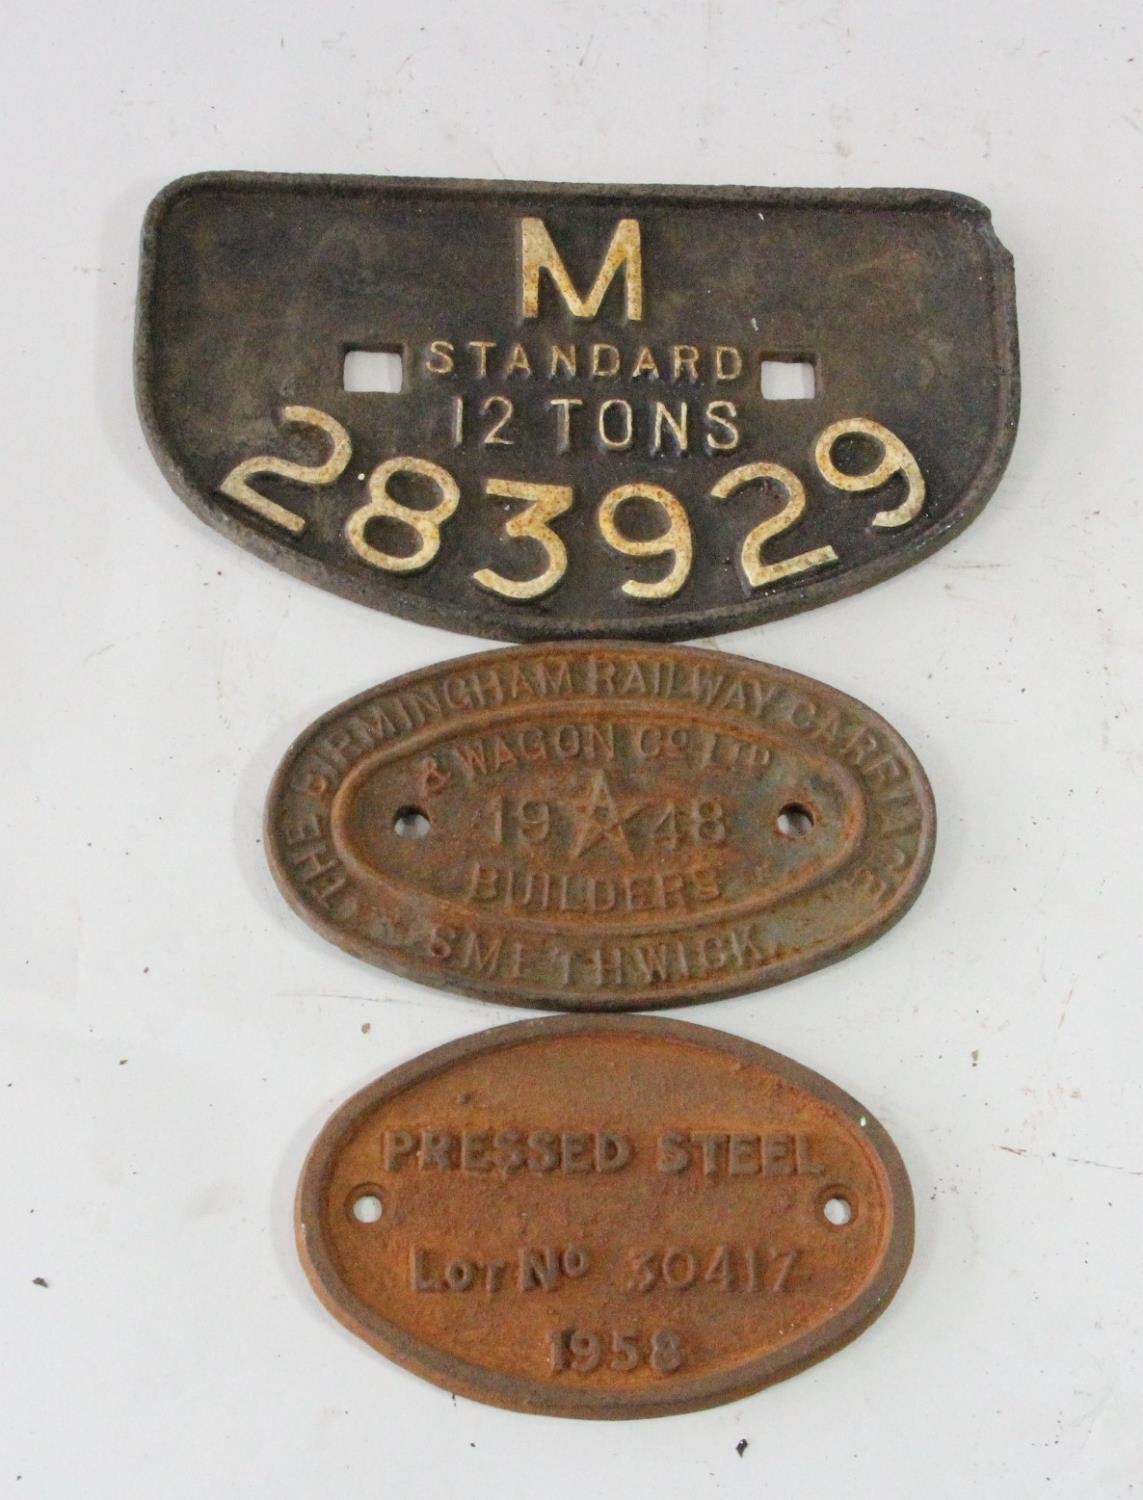 A 'D' wagon plate, M 12 tons 283929 and 2 small oval wagon plates, Birmingham R.C.&W Co.LTD,